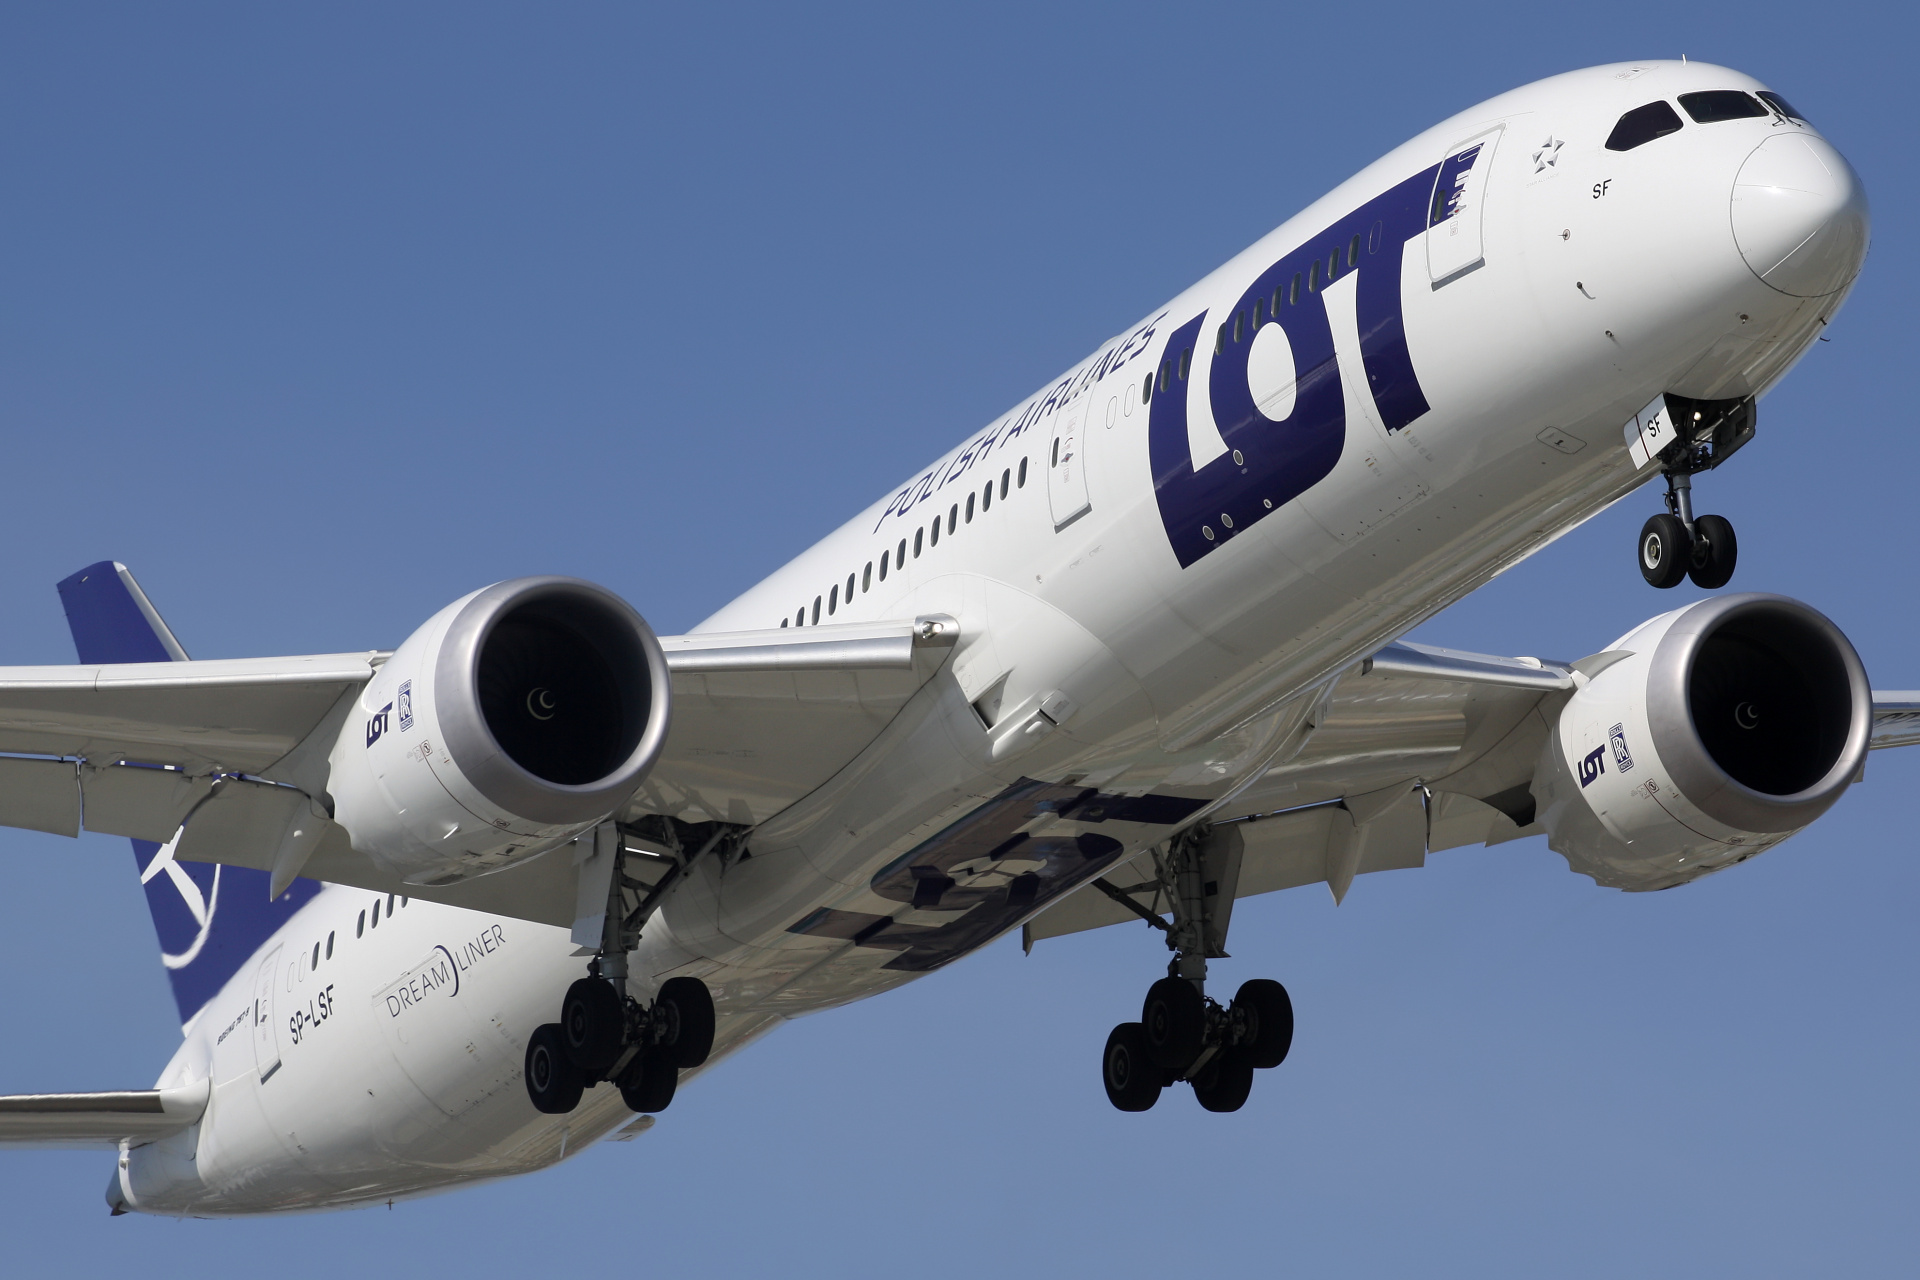 SP-LSF (Aircraft » EPWA Spotting » Boeing 787-9 Dreamliner » LOT Polish Airlines)